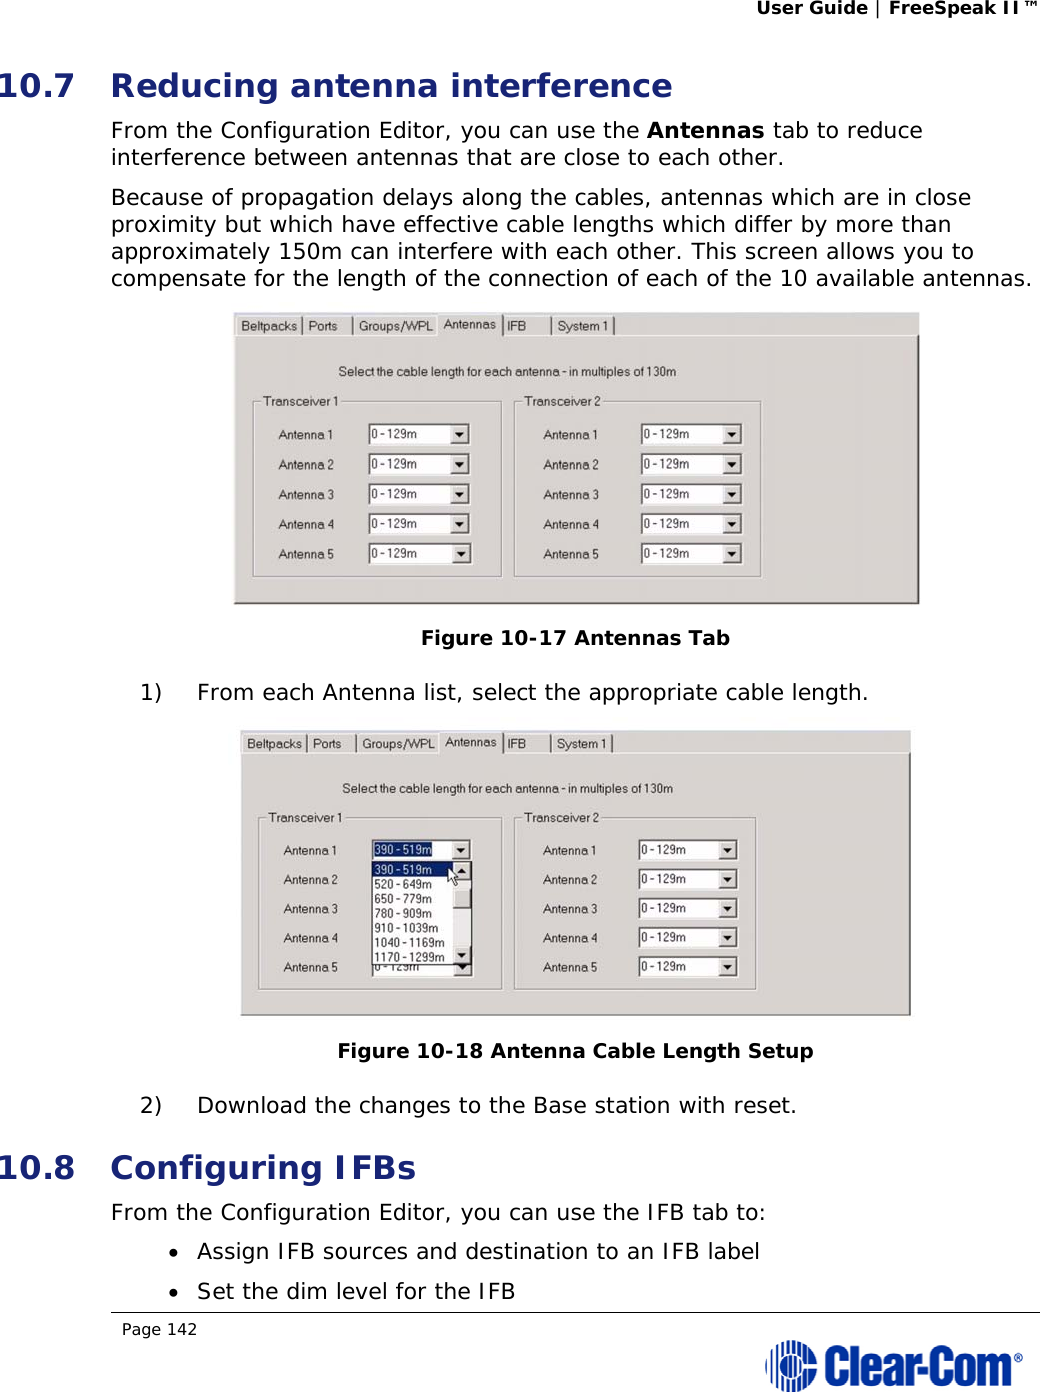 User Guide | FreeSpeak II™  Page 142  10.7 Reducing antenna interference  From the Configuration Editor, you can use the Antennas tab to reduce interference between antennas that are close to each other. Because of propagation delays along the cables, antennas which are in close proximity but which have effective cable lengths which differ by more than approximately 150m can interfere with each other. This screen allows you to compensate for the length of the connection of each of the 10 available antennas.  Figure 10-17 Antennas Tab 1) From each Antenna list, select the appropriate cable length.  Figure 10-18 Antenna Cable Length Setup 2) Download the changes to the Base station with reset. 10.8 Configuring IFBs From the Configuration Editor, you can use the IFB tab to:  Assign IFB sources and destination to an IFB label  Set the dim level for the IFB 